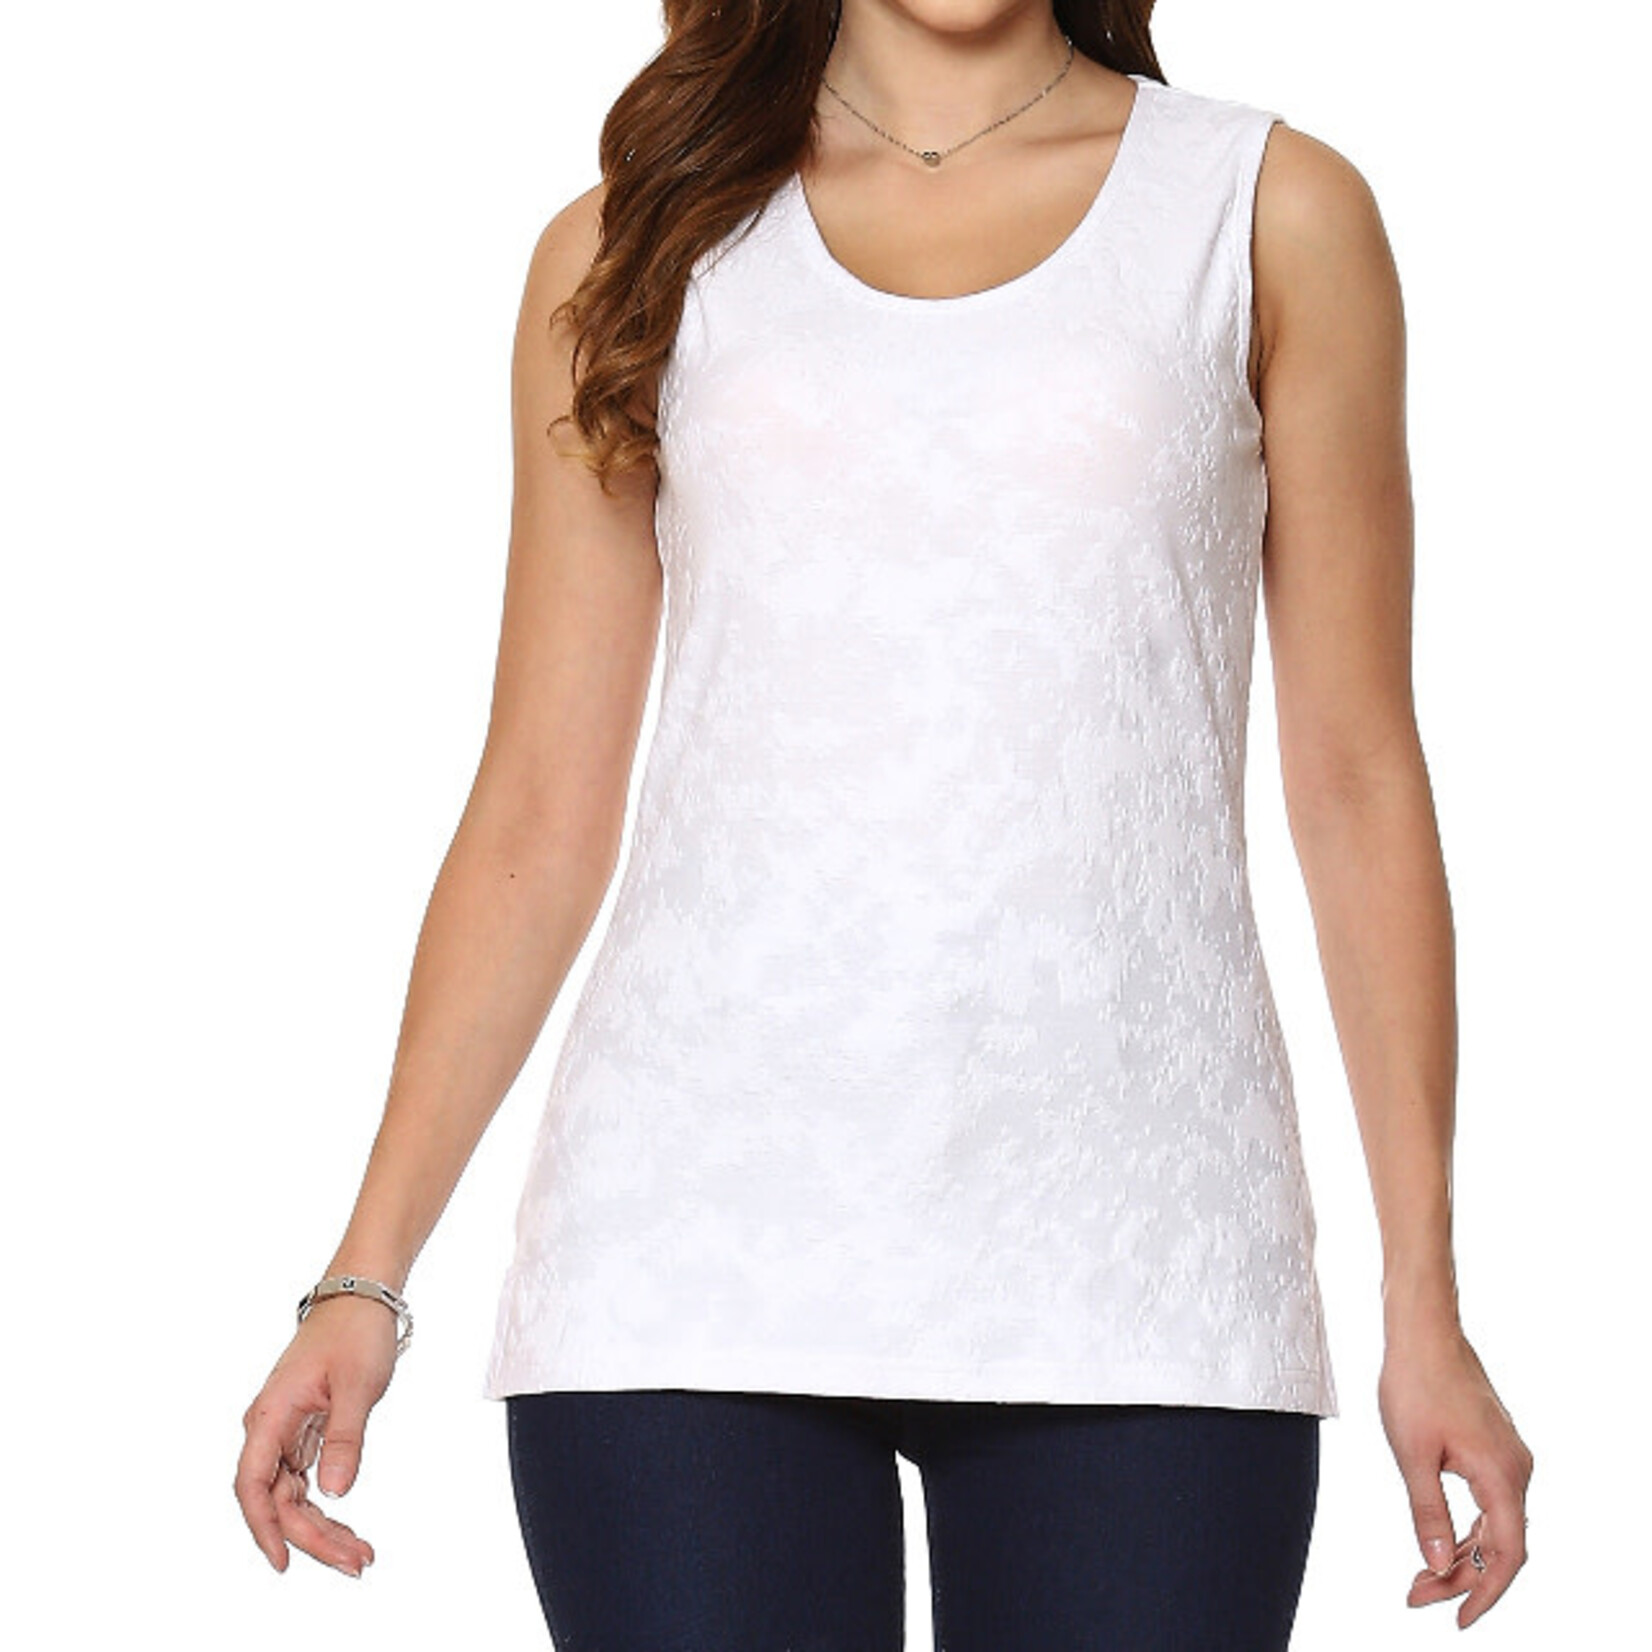 Parsley and Sage White Textured Tank Top